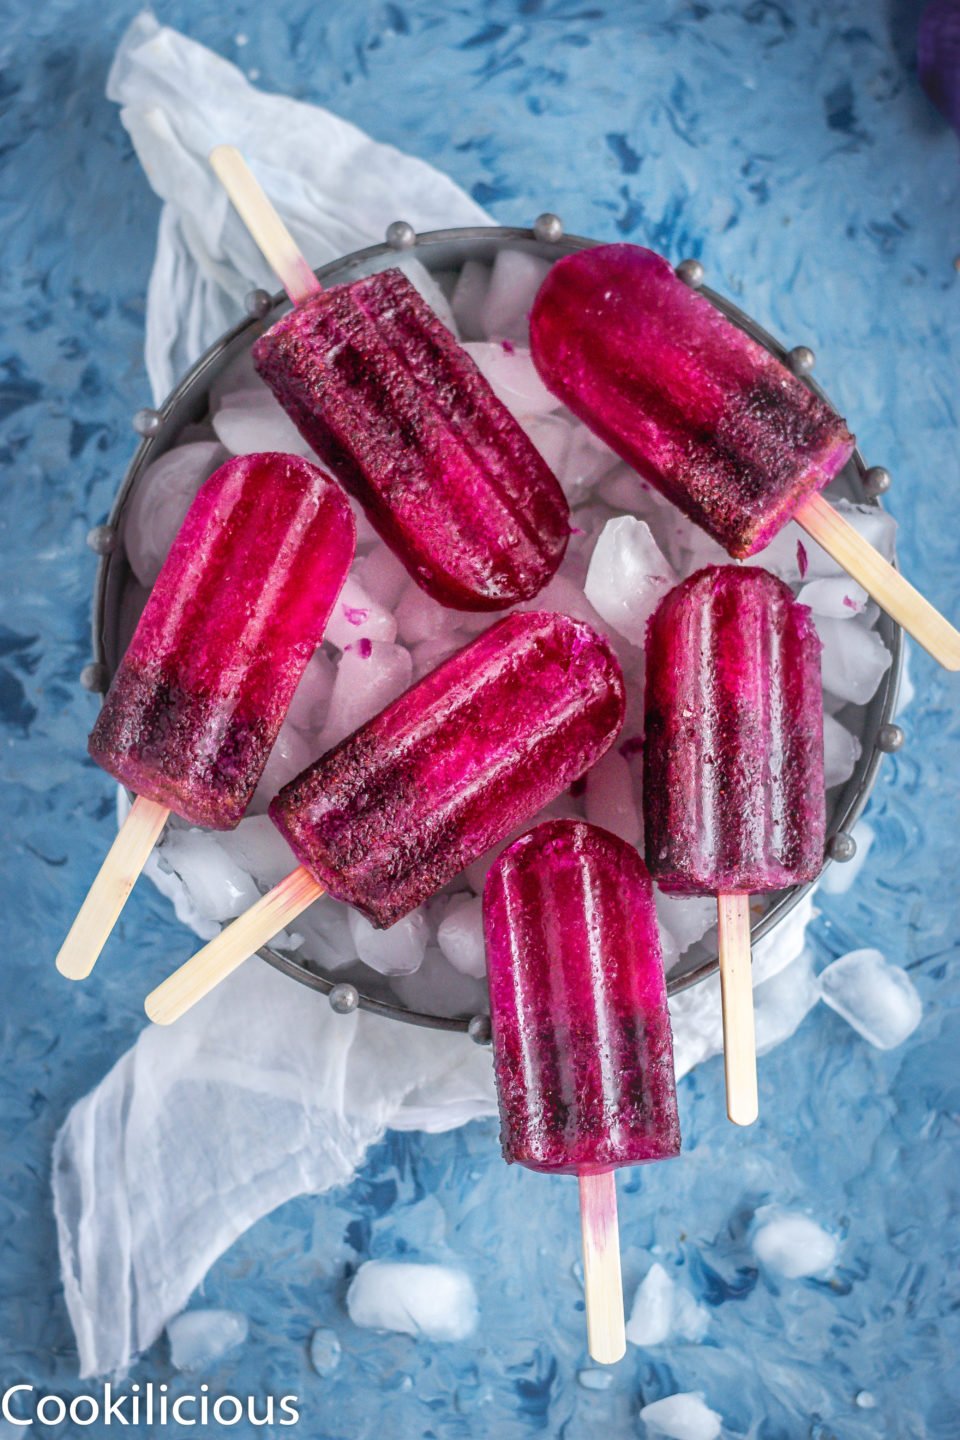 many Masala Soda Blueberry Popsicles placed on a tray filled with ice cubes